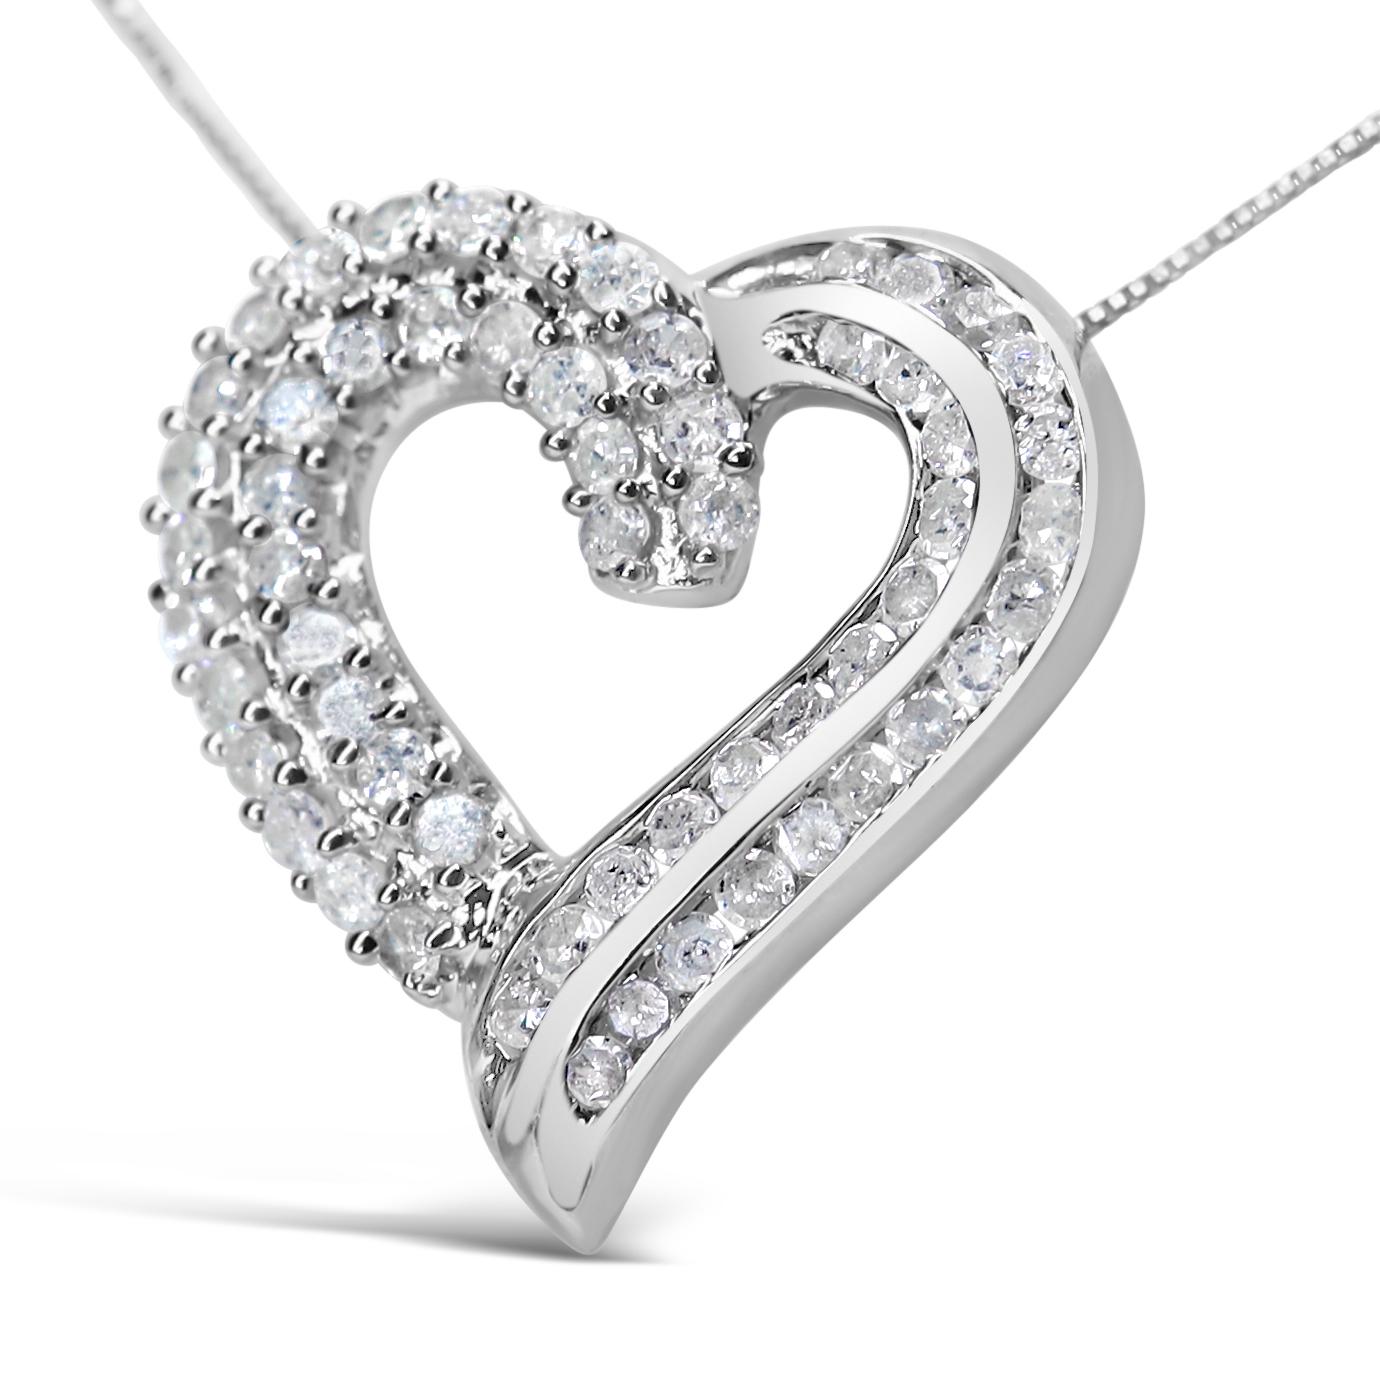 This sensational pendant necklace will put you in a romantic frame of mind as its openwork heart silhouette glistens with round diamonds! The striking design radiates beauty in sculpted ribbons of channel-set diamonds in two rows along one side,